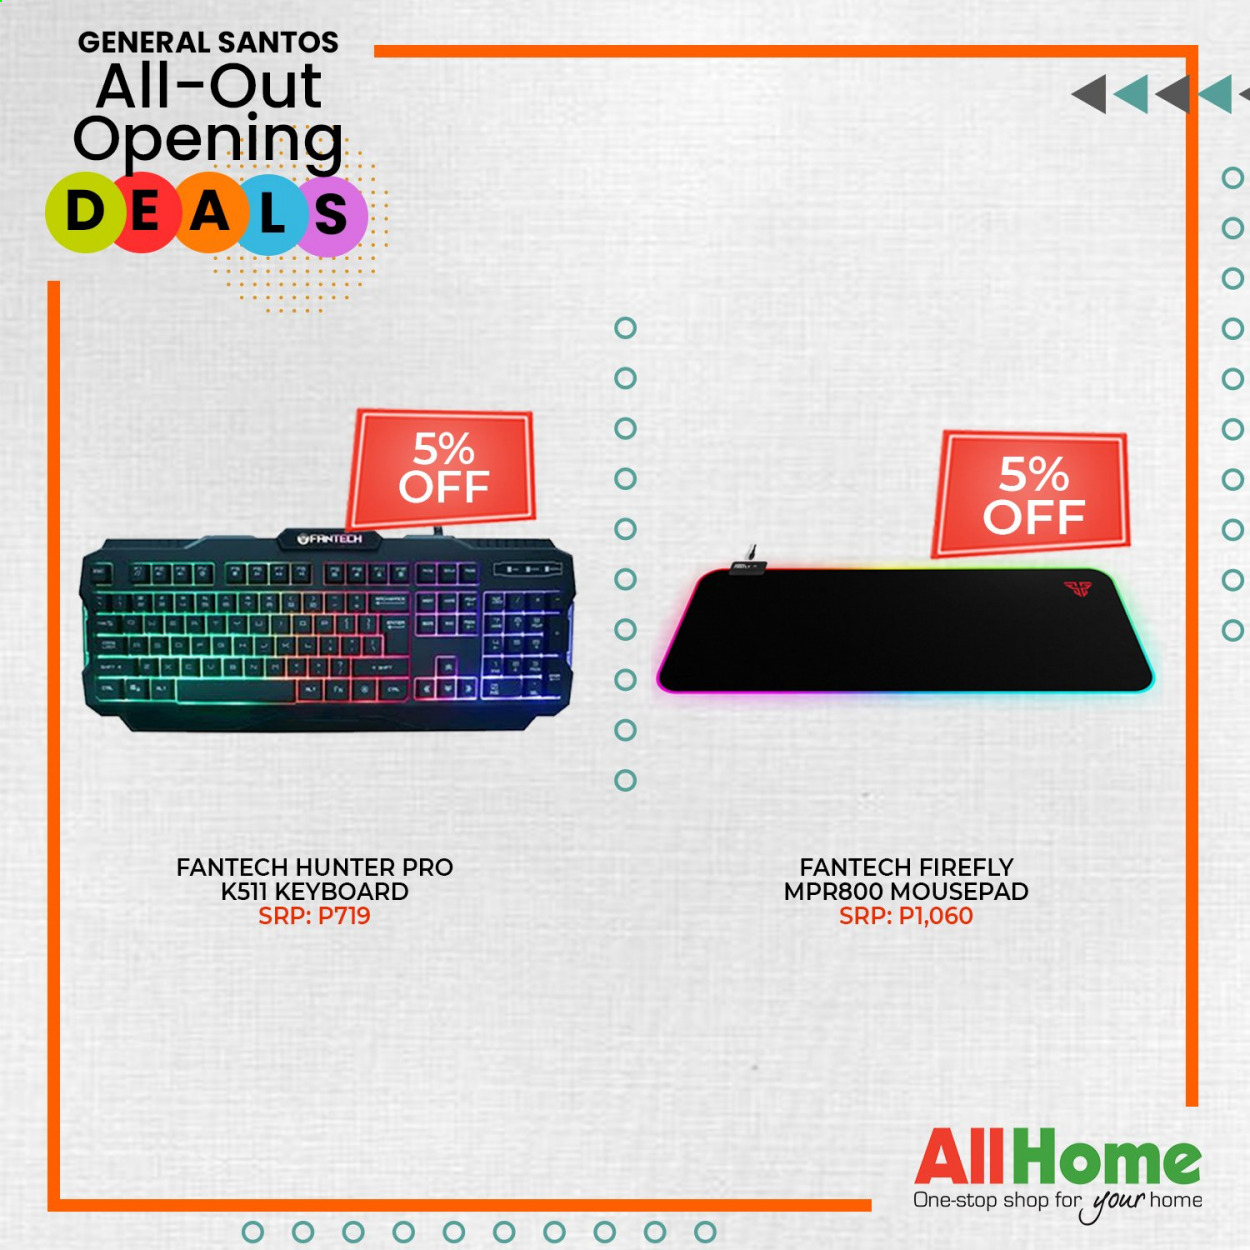 thumbnail - AllHome offer  - 30.1.2021 - 28.2.2021 - Sales products - keyboard, Hunter. Page 7.